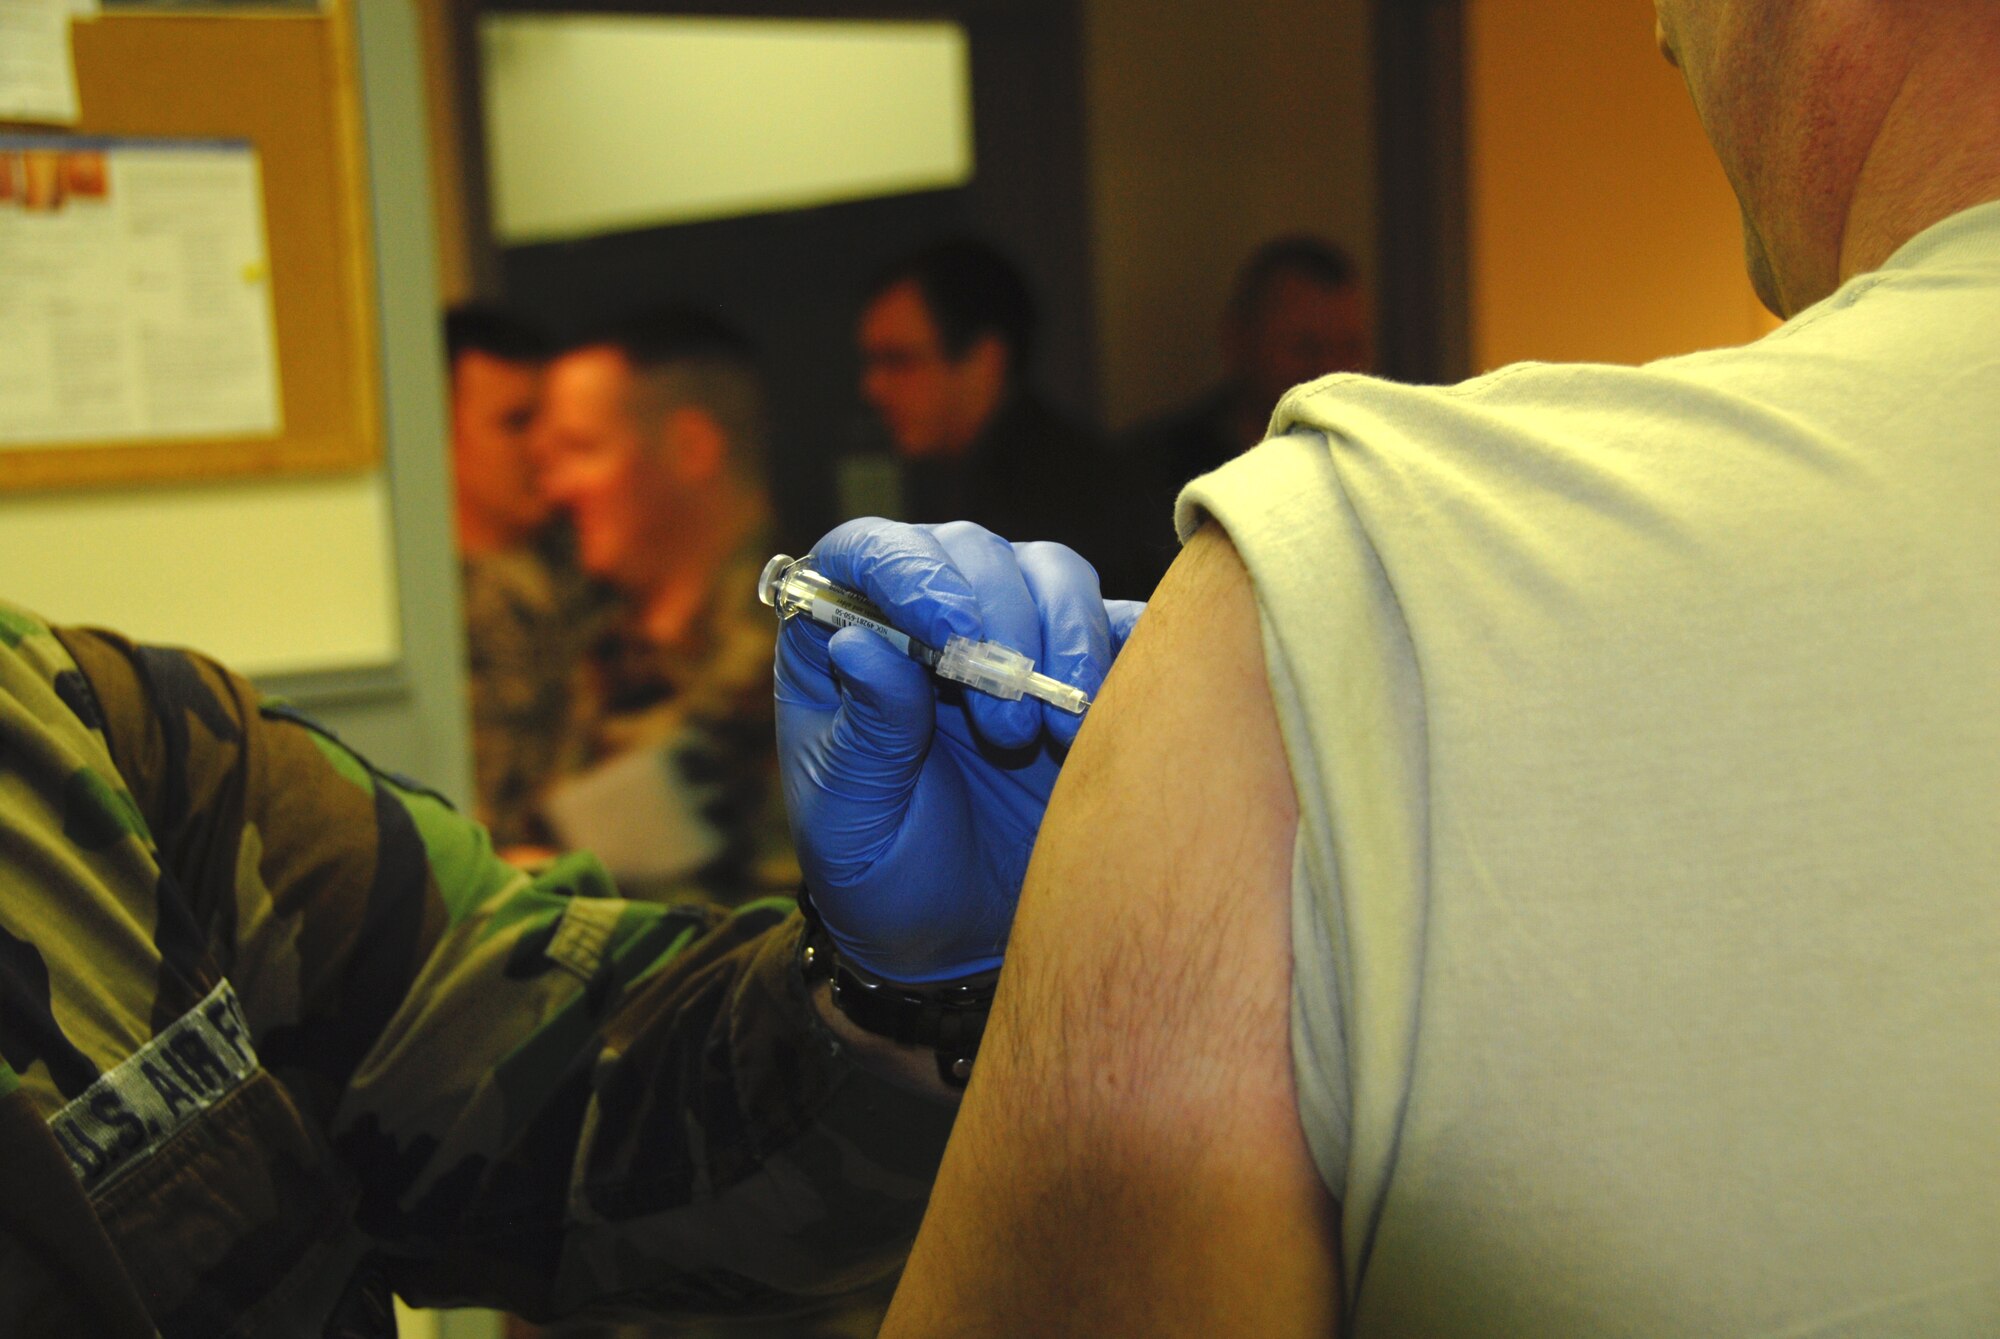 H1N1 vaccines were given our to members of the 185th ARW in Sioux City, IA. Official Air Force photo by Tech. Sgt. Jeremy J. McClure. 